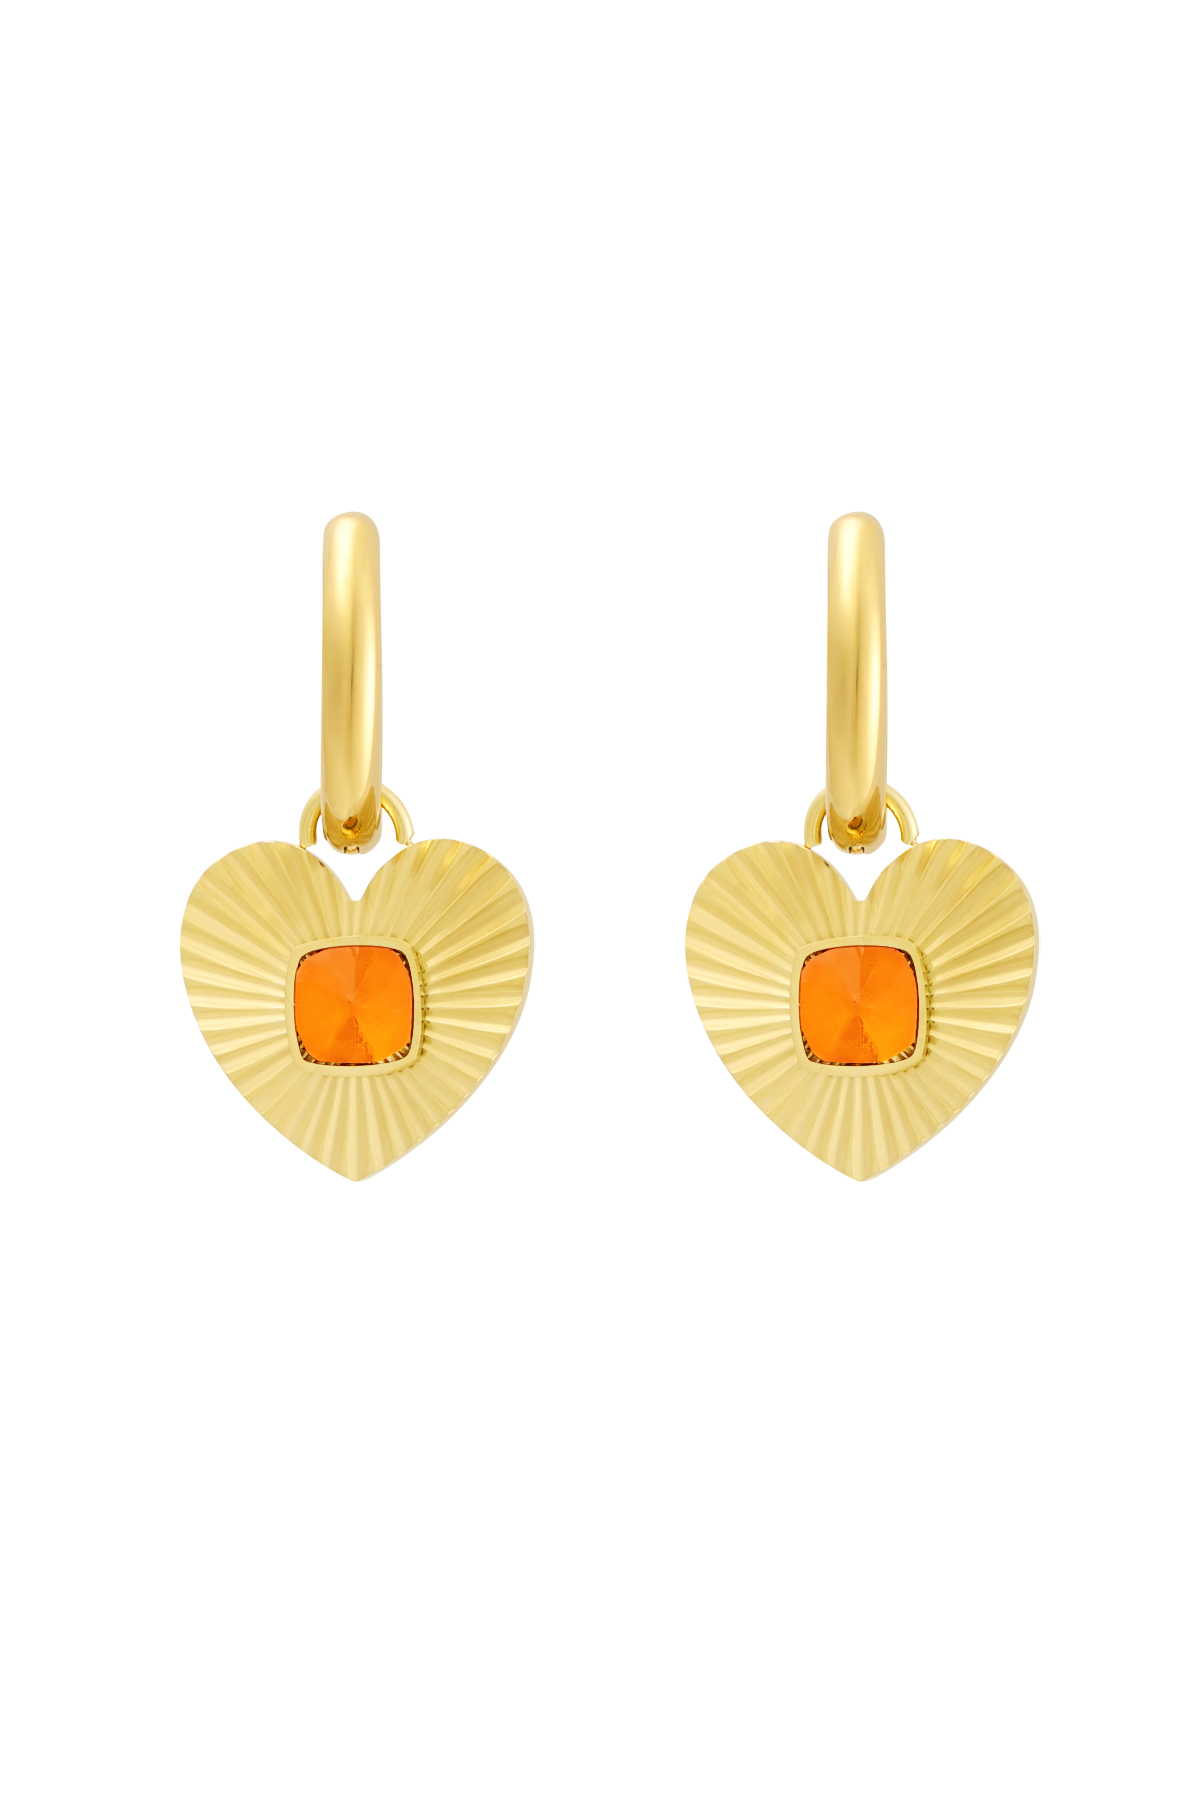 Earrings heart with stone - gold/orange h5 